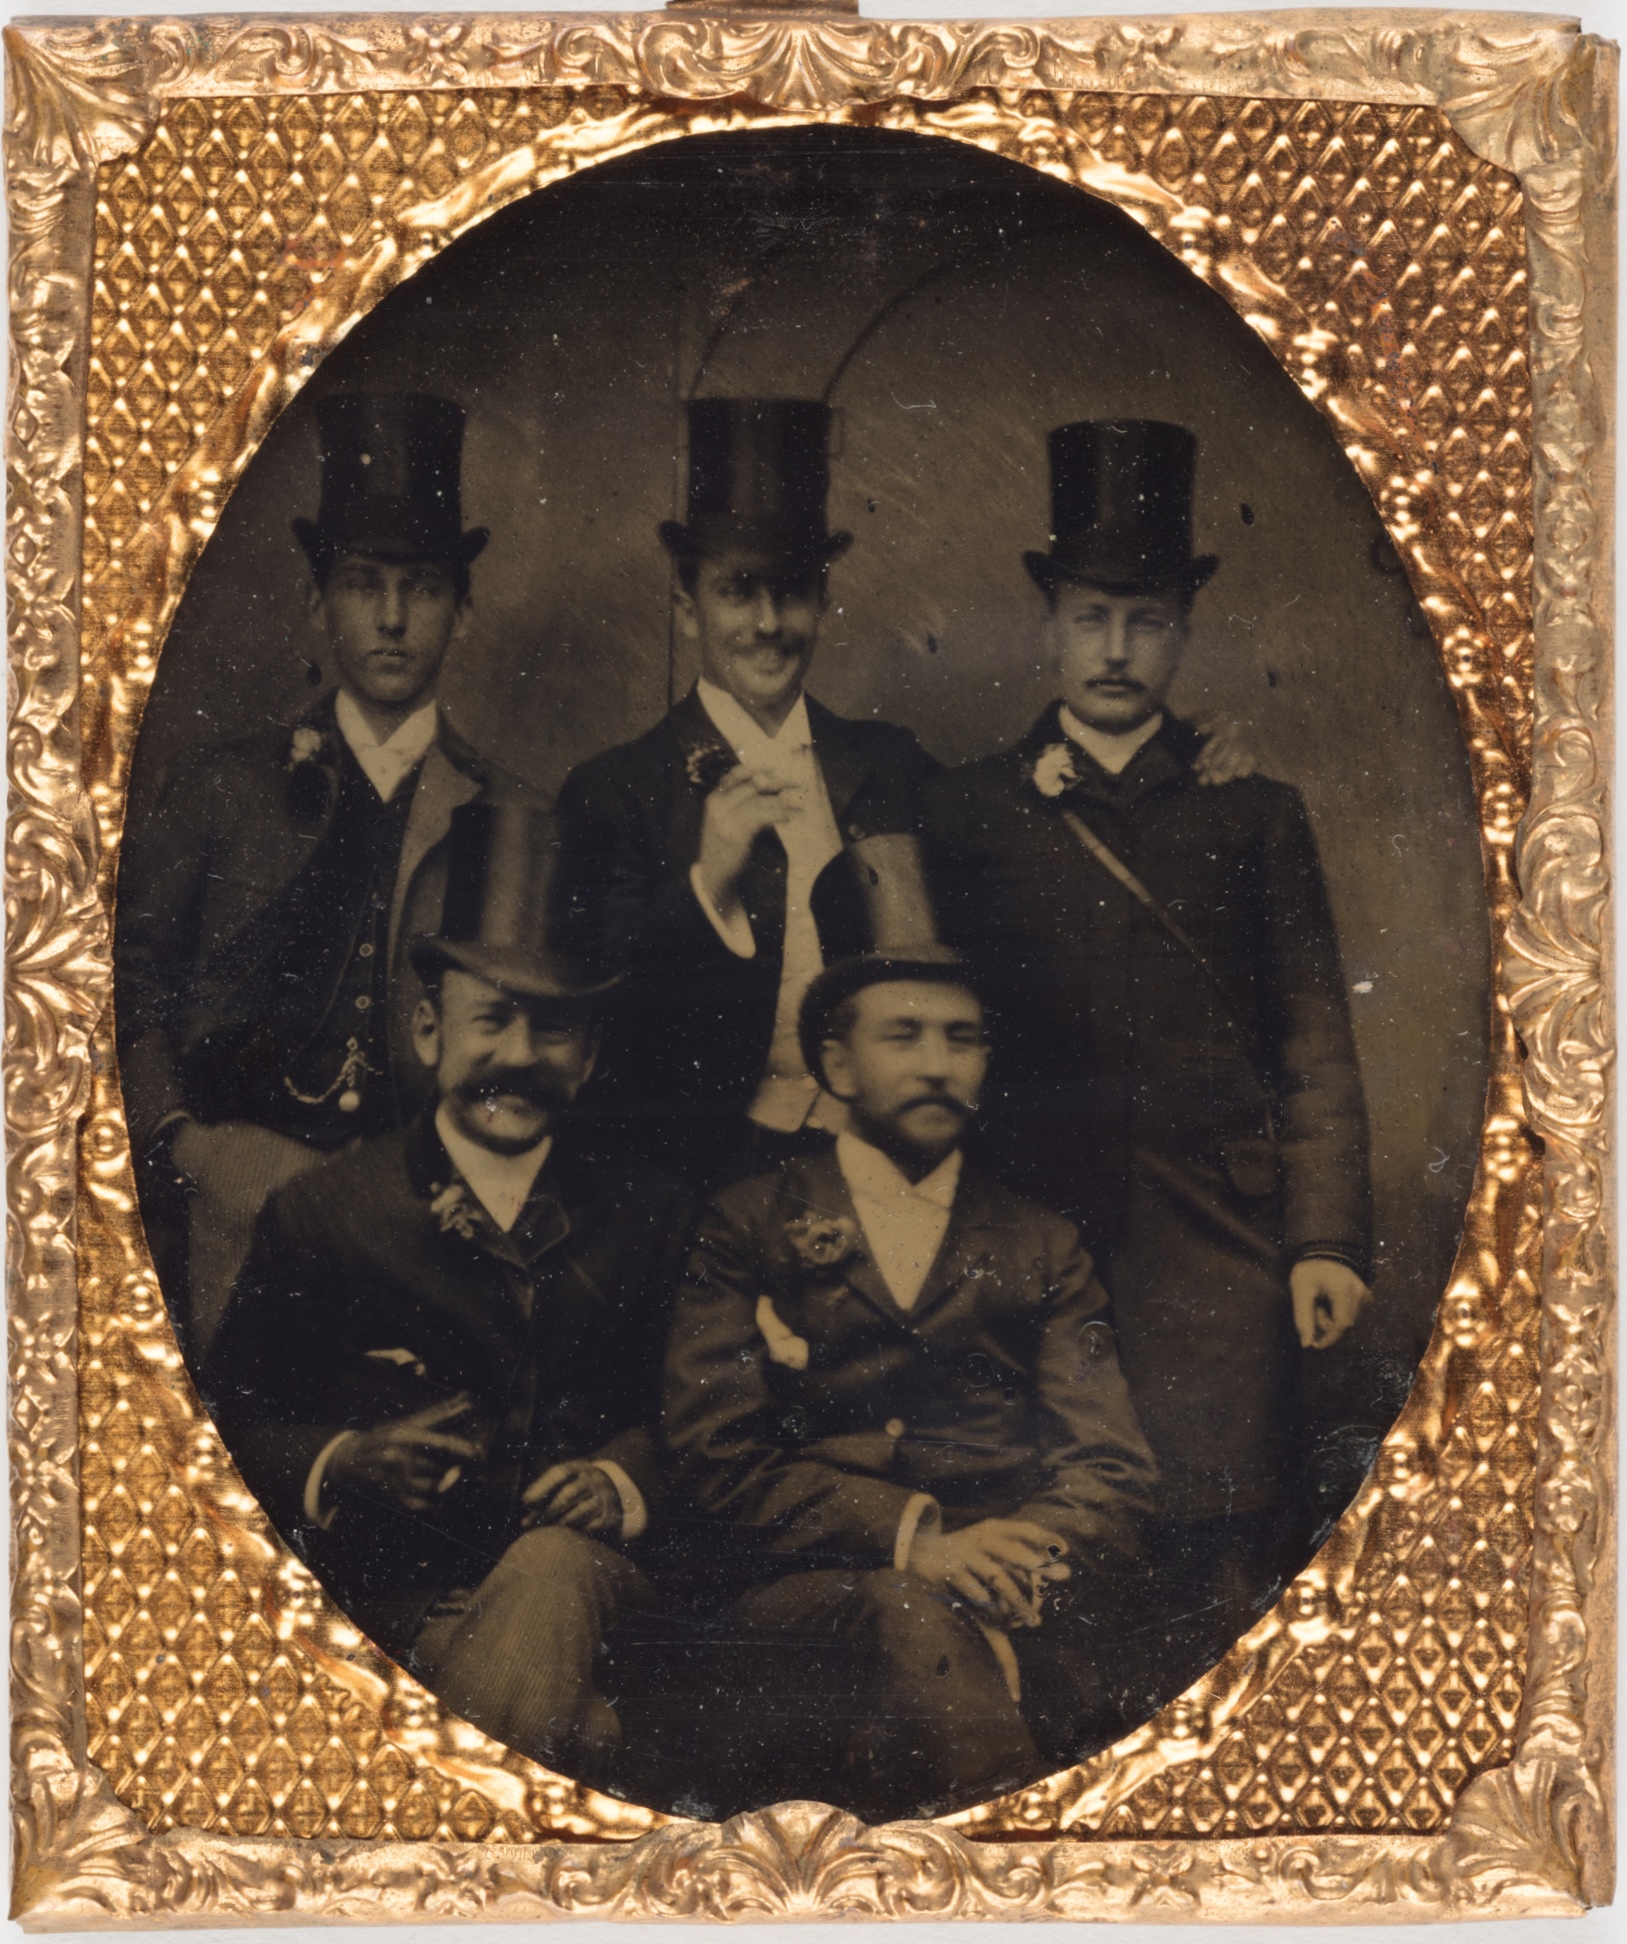 Tintype photograph of group of five men wearing formal dress, including Leslie Walford (1869-1928), around 1885  / photographer unknown